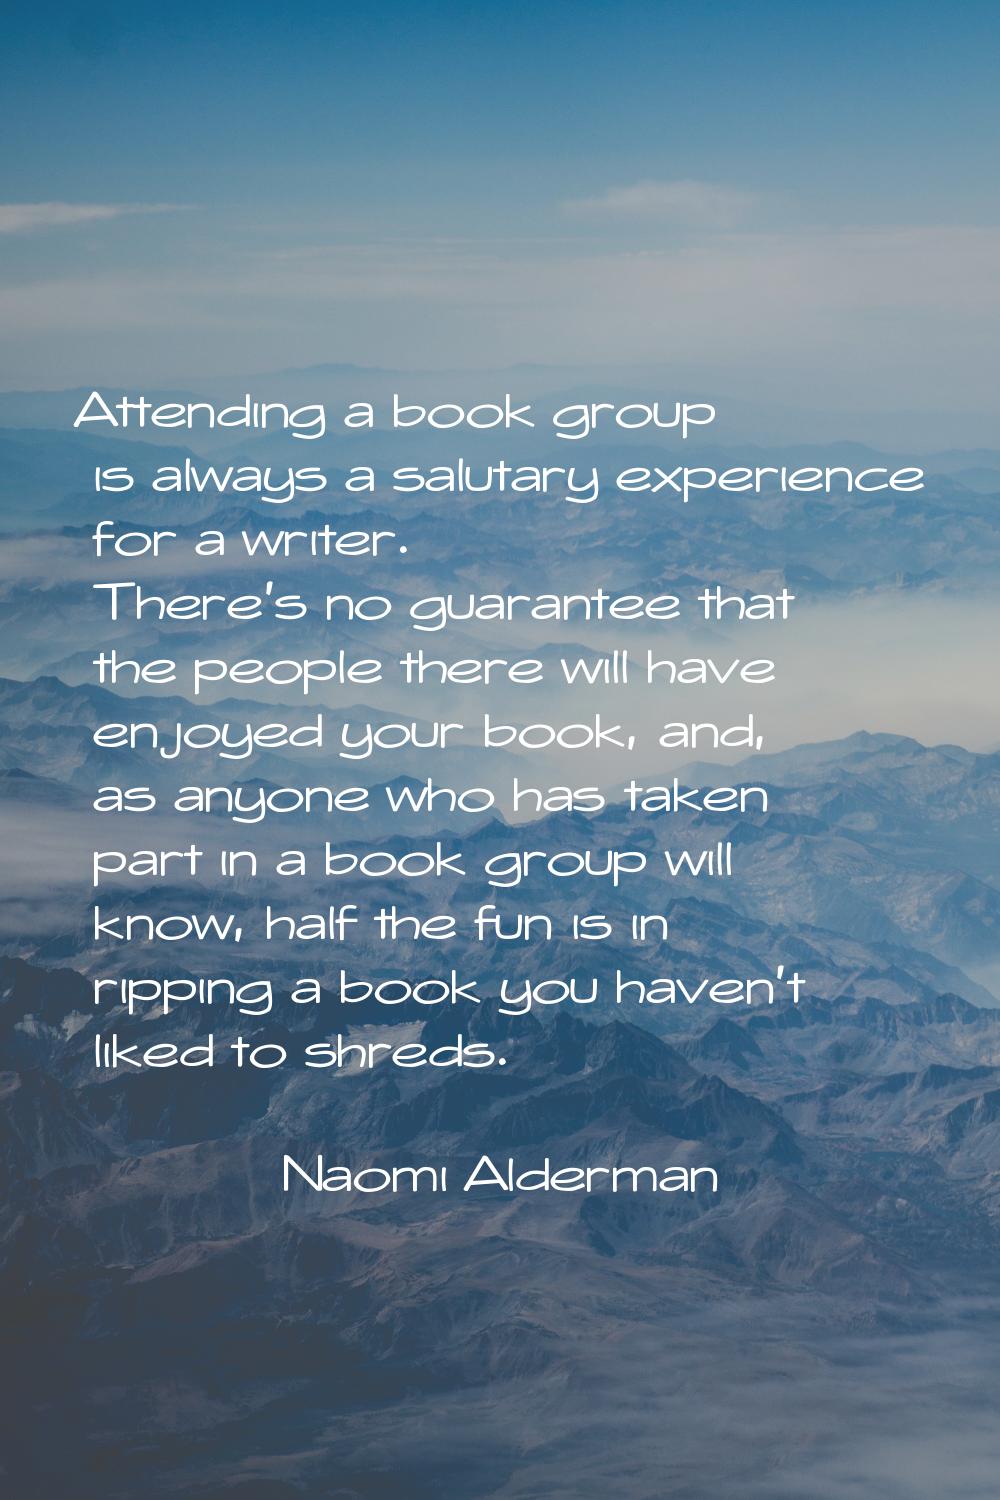 Attending a book group is always a salutary experience for a writer. There's no guarantee that the 